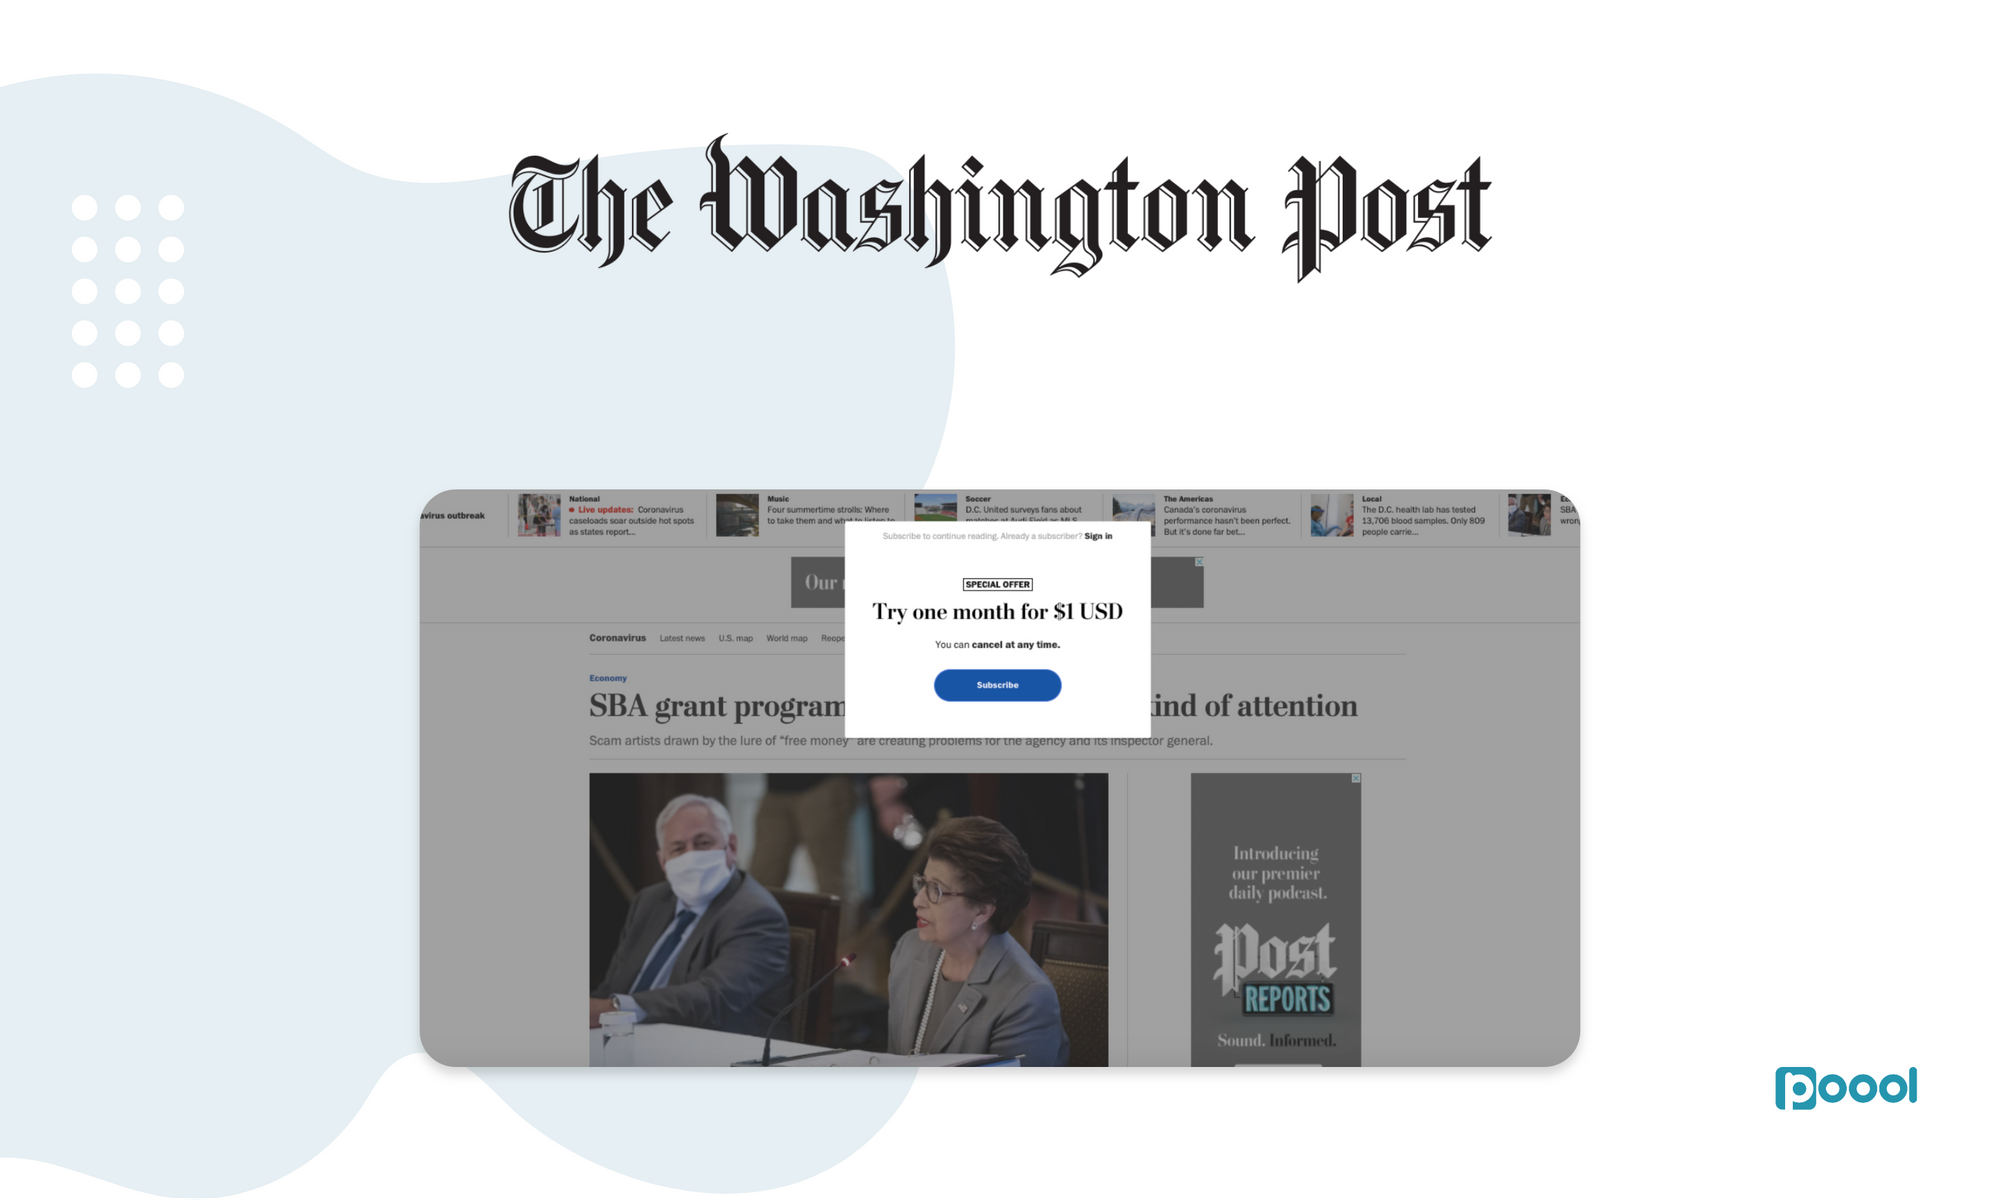 The Washington Post Paywall: From Content, to Subscription to Content | Series.